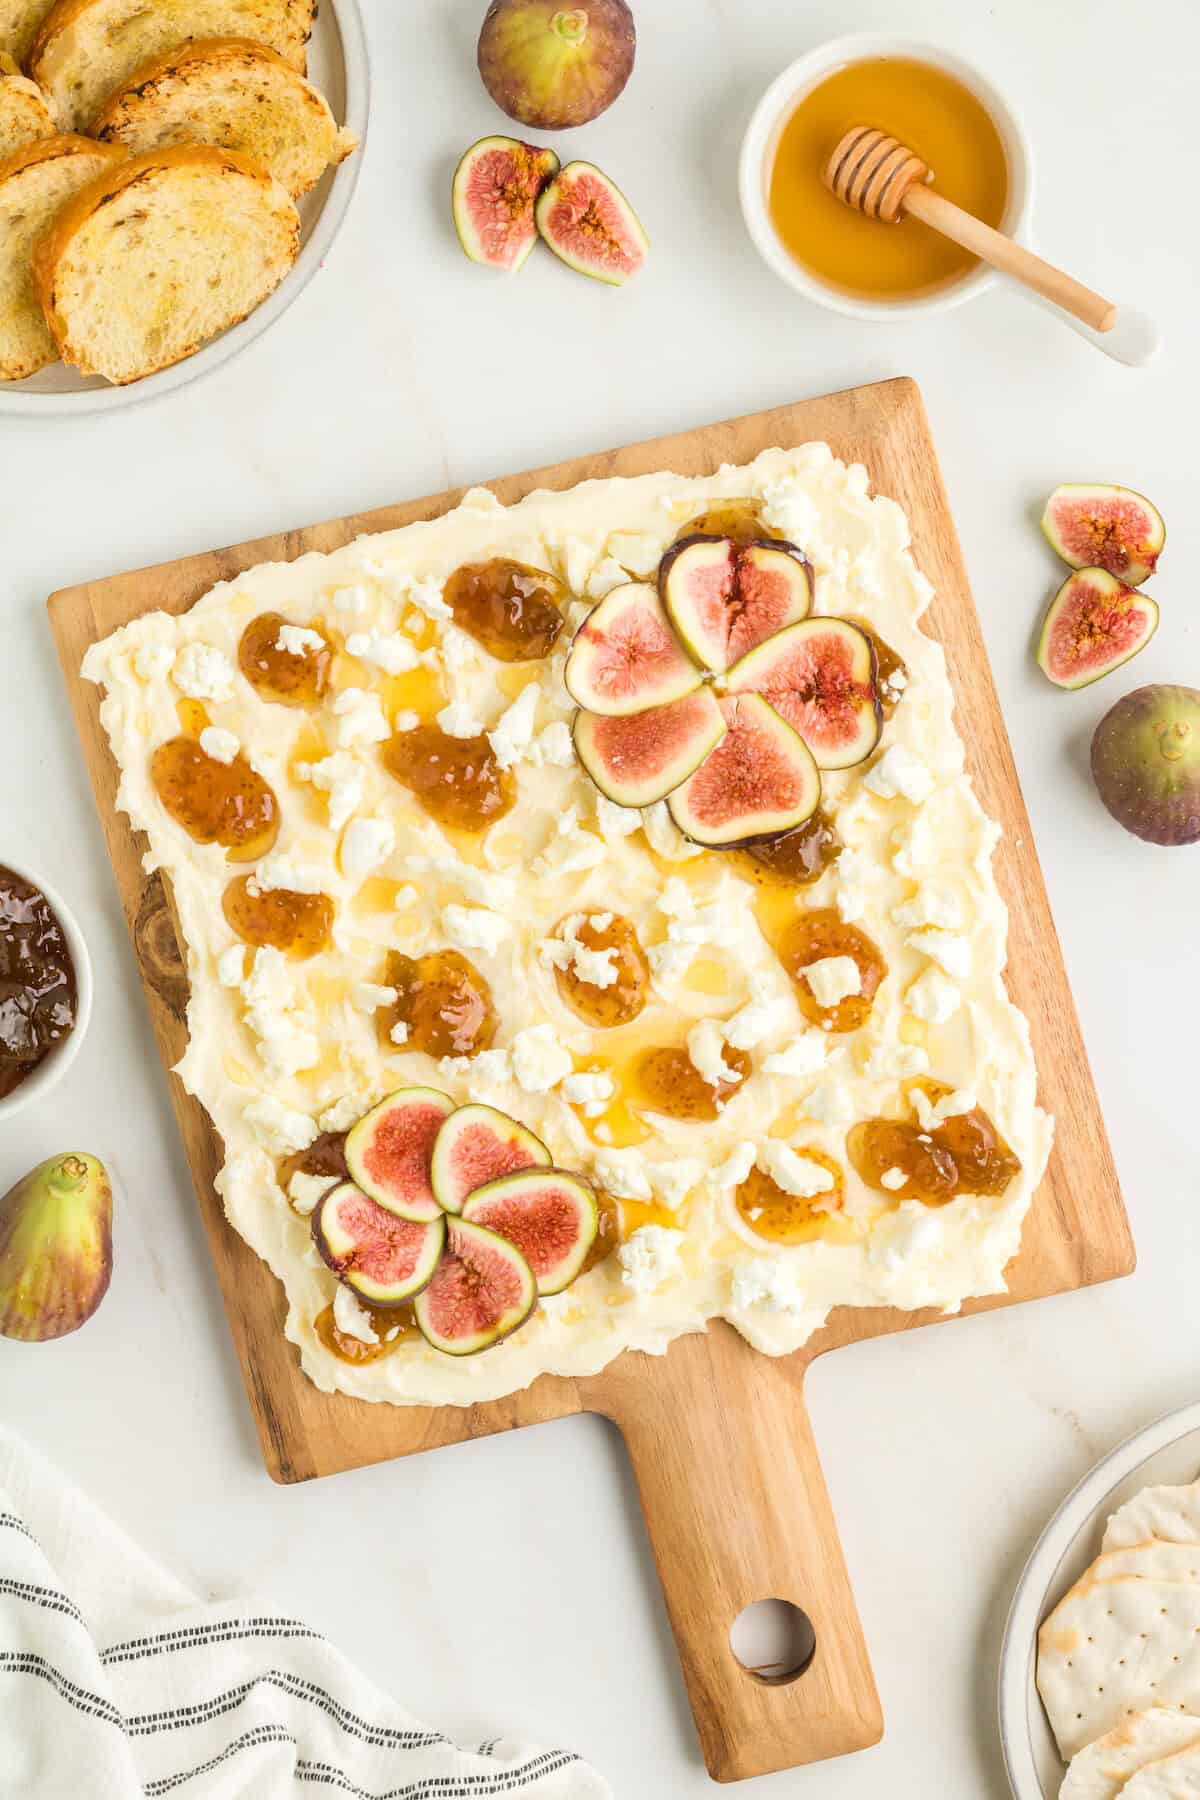 butter bread with figs and honey with goat cheese.